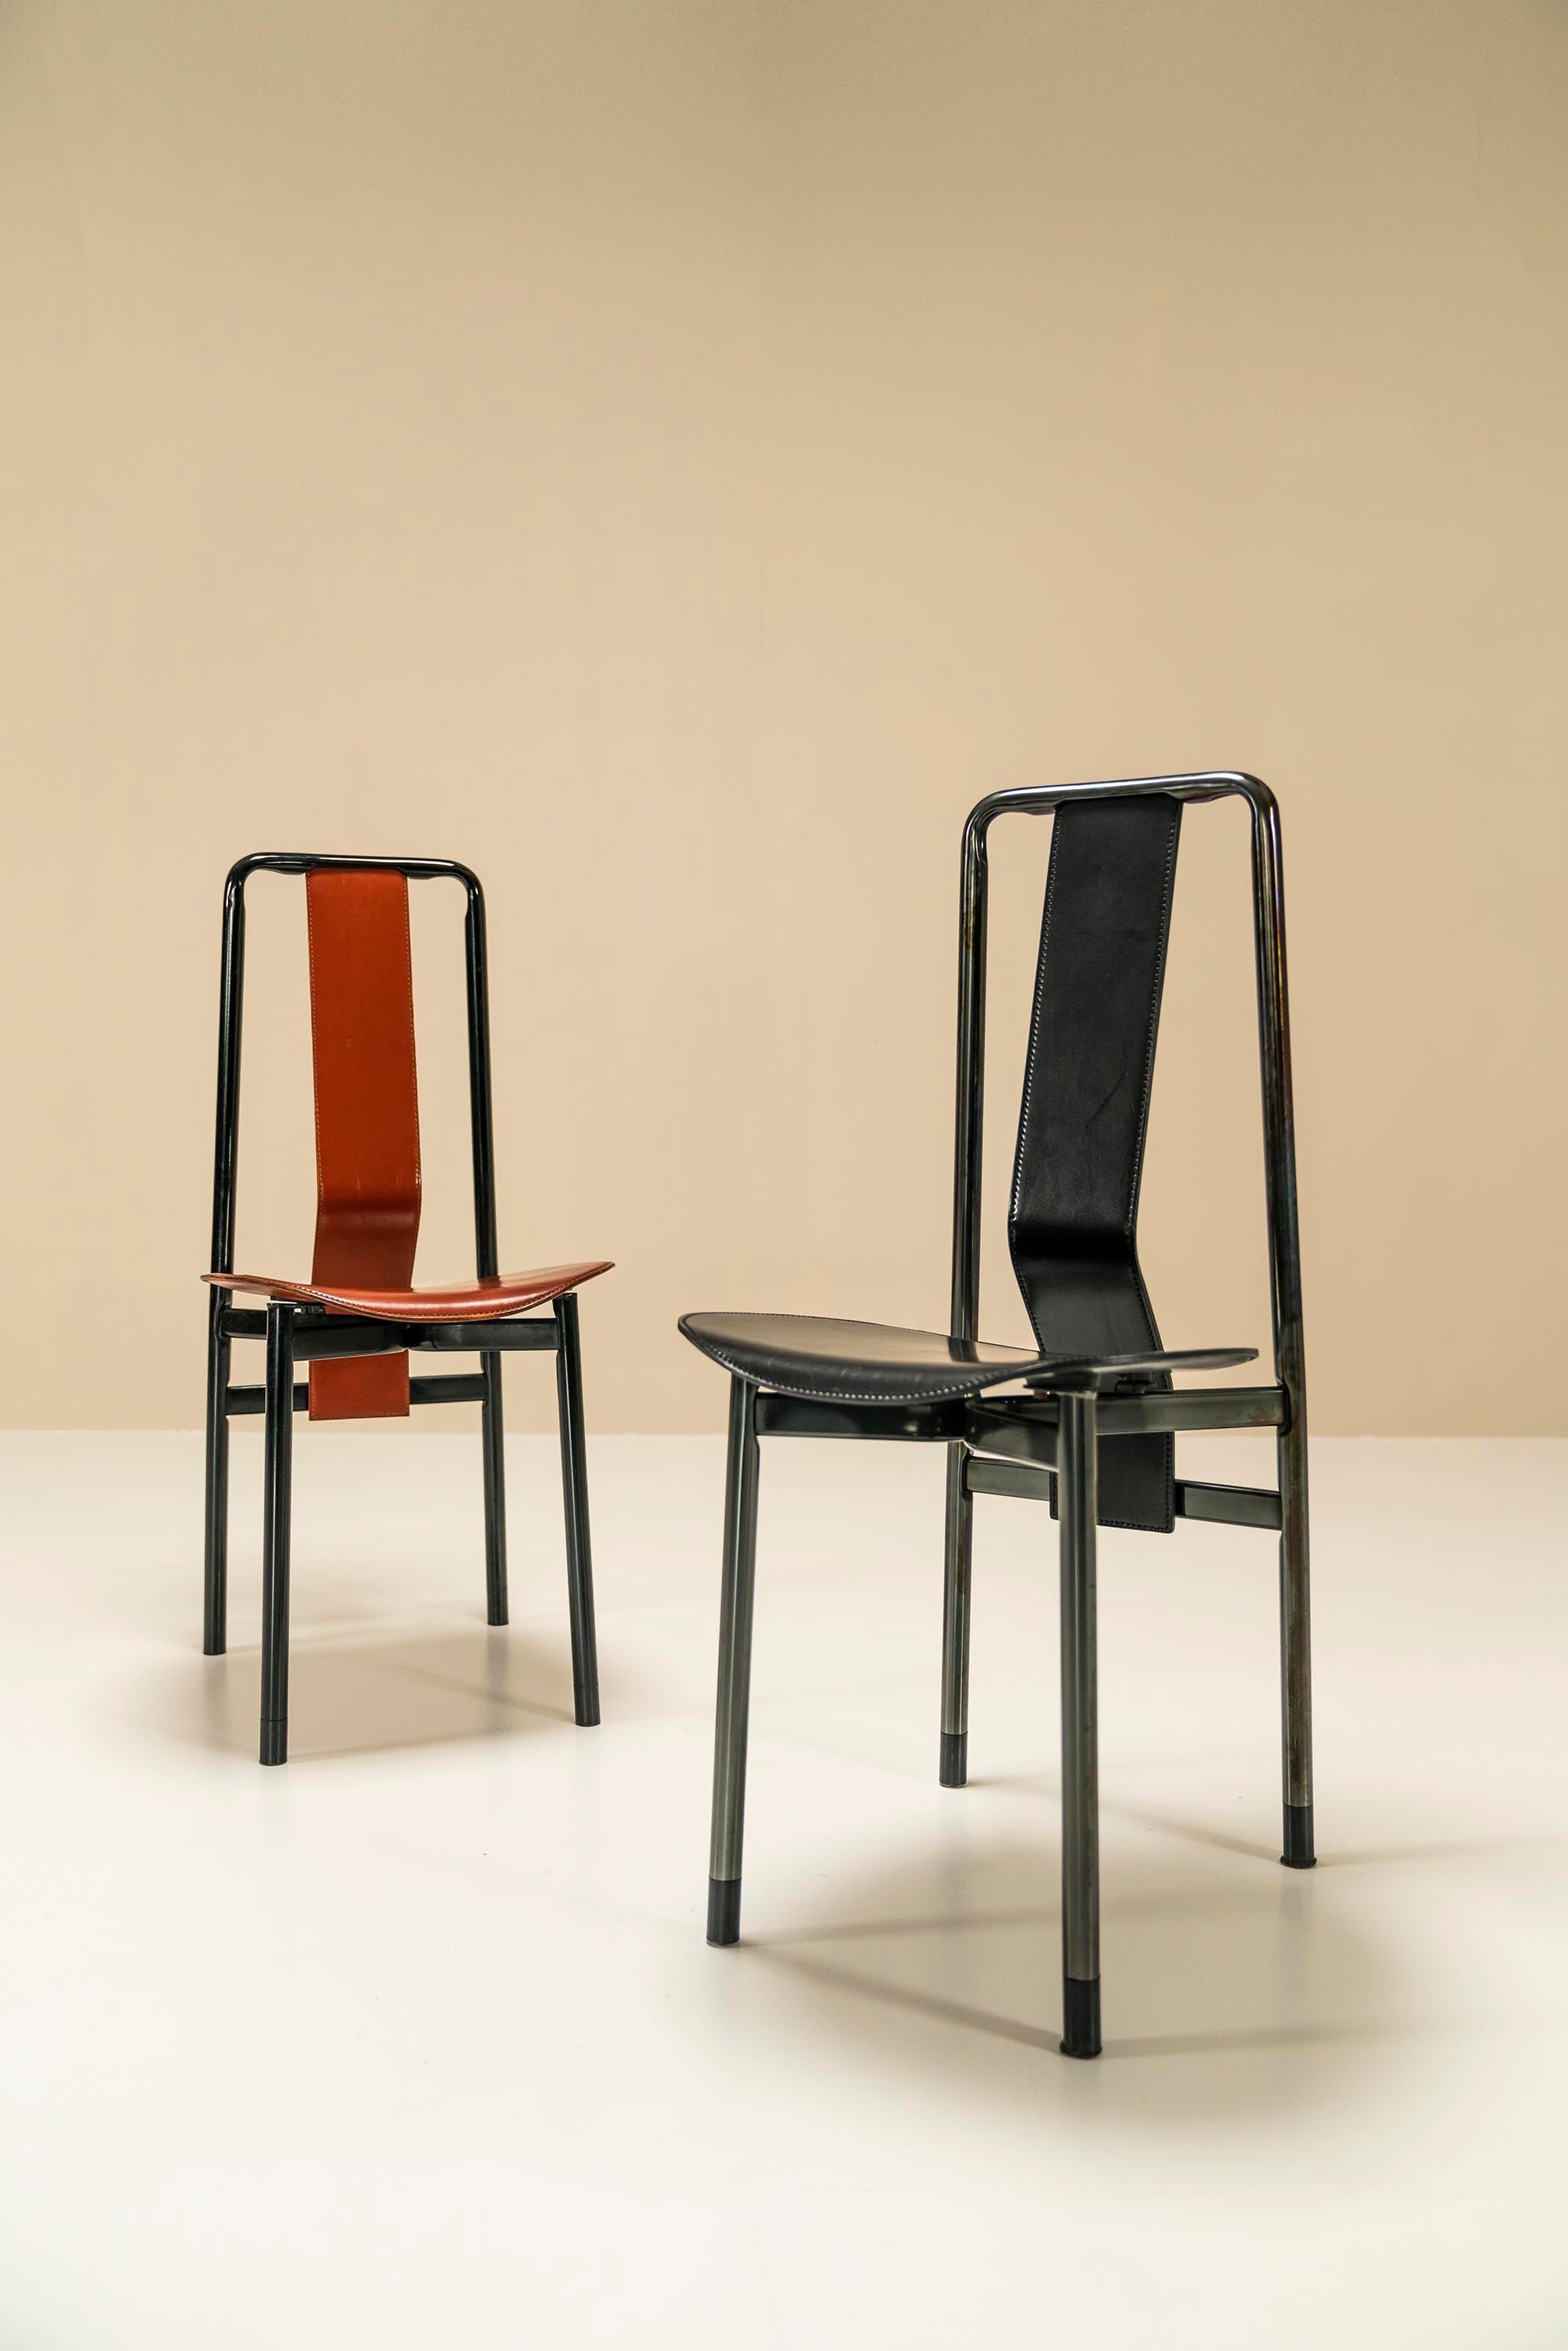 Late 20th Century Set of 8 “Irma” Dining Chairs by Achille Castiglioni for Zanotta, Italy 1970s For Sale